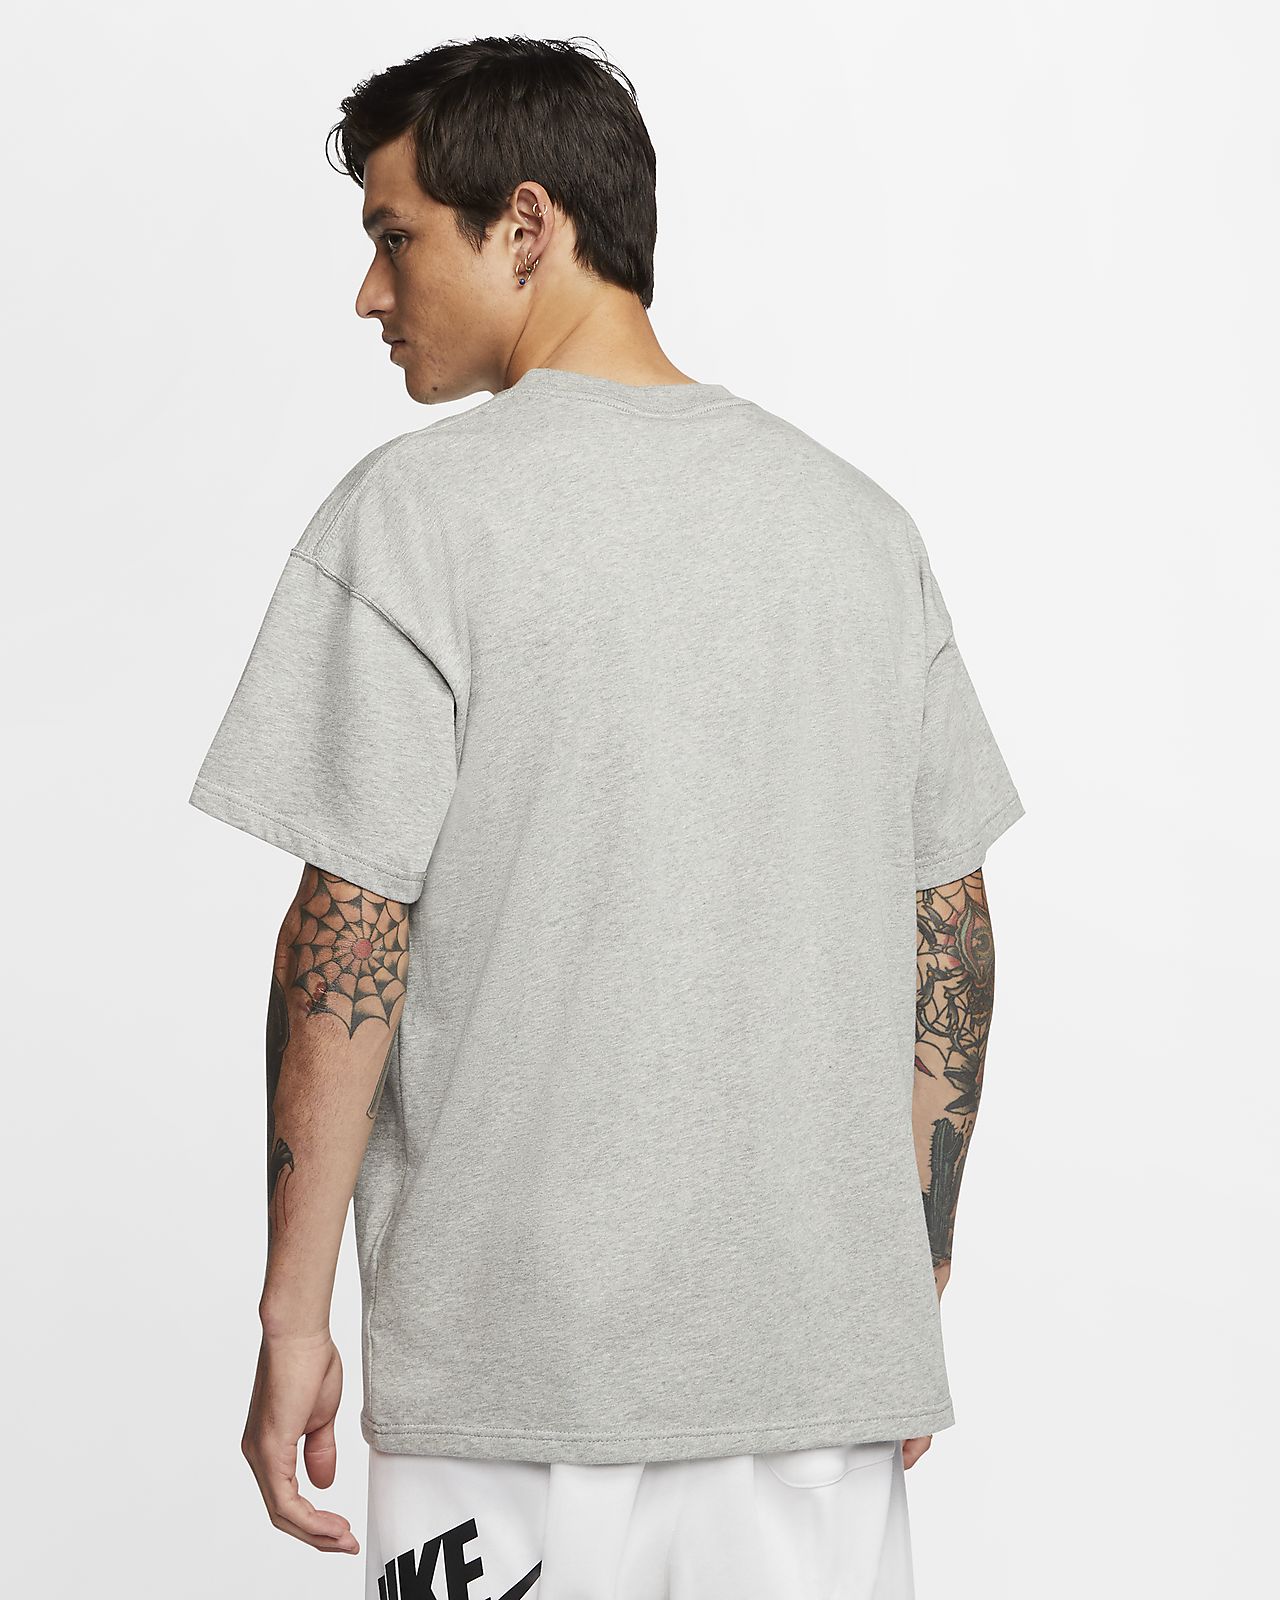 nike loose fit t shirt buy clothes 